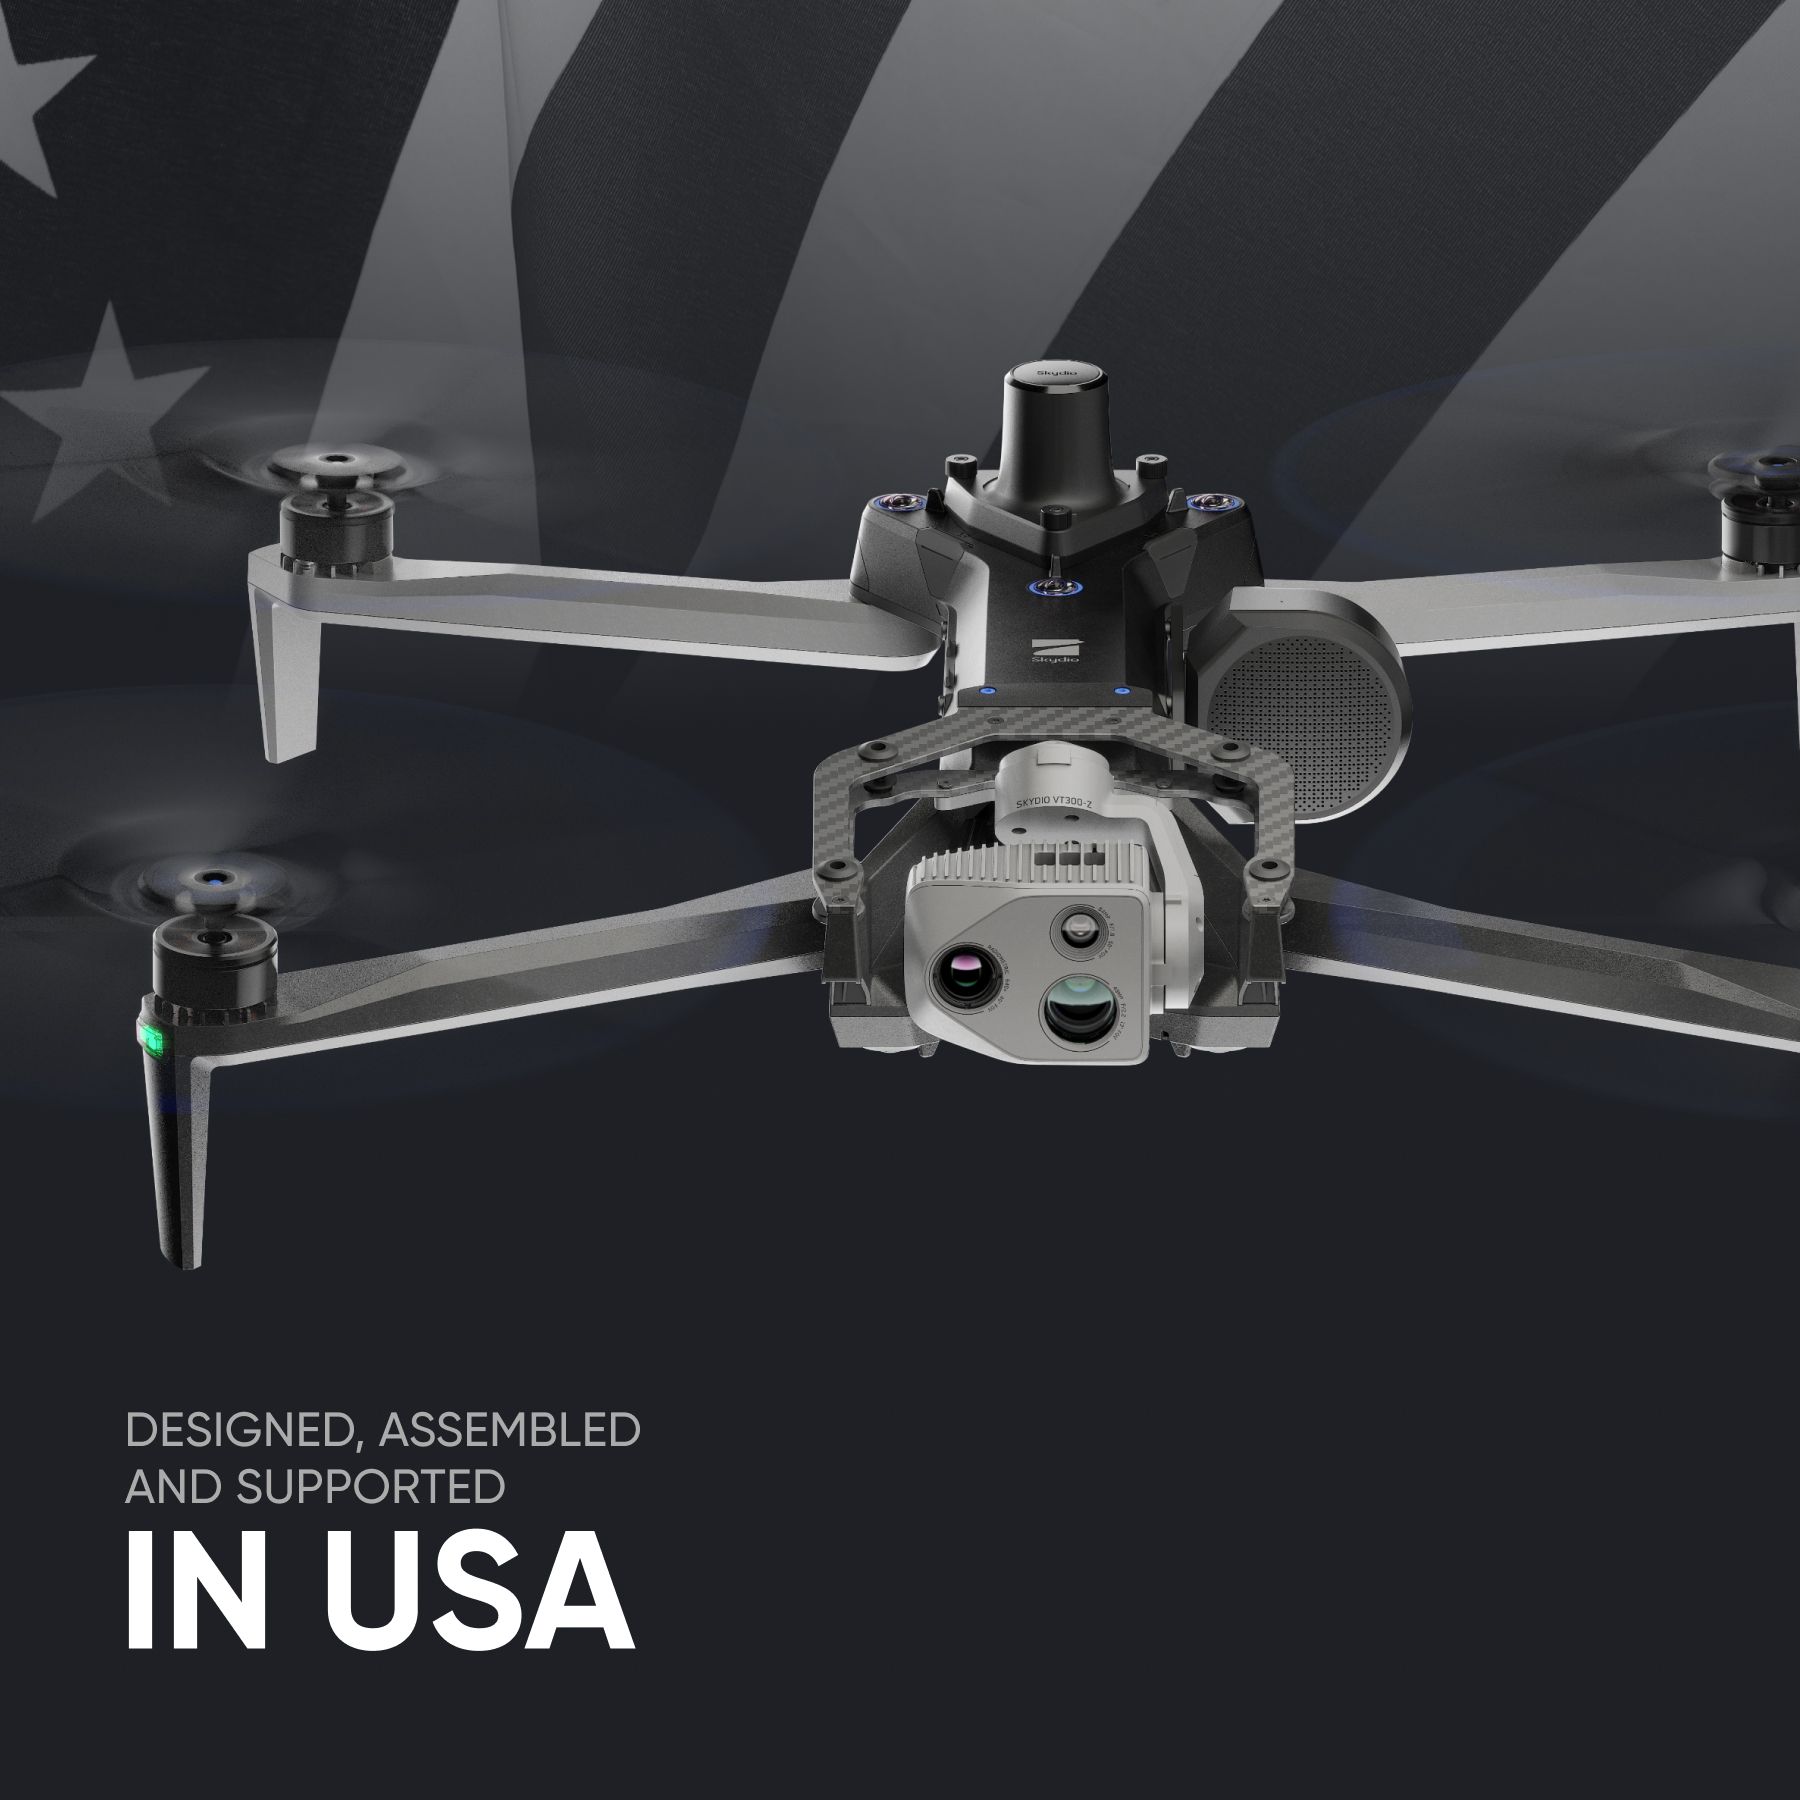 Skydio police drone with black-and-white USA flag in the background